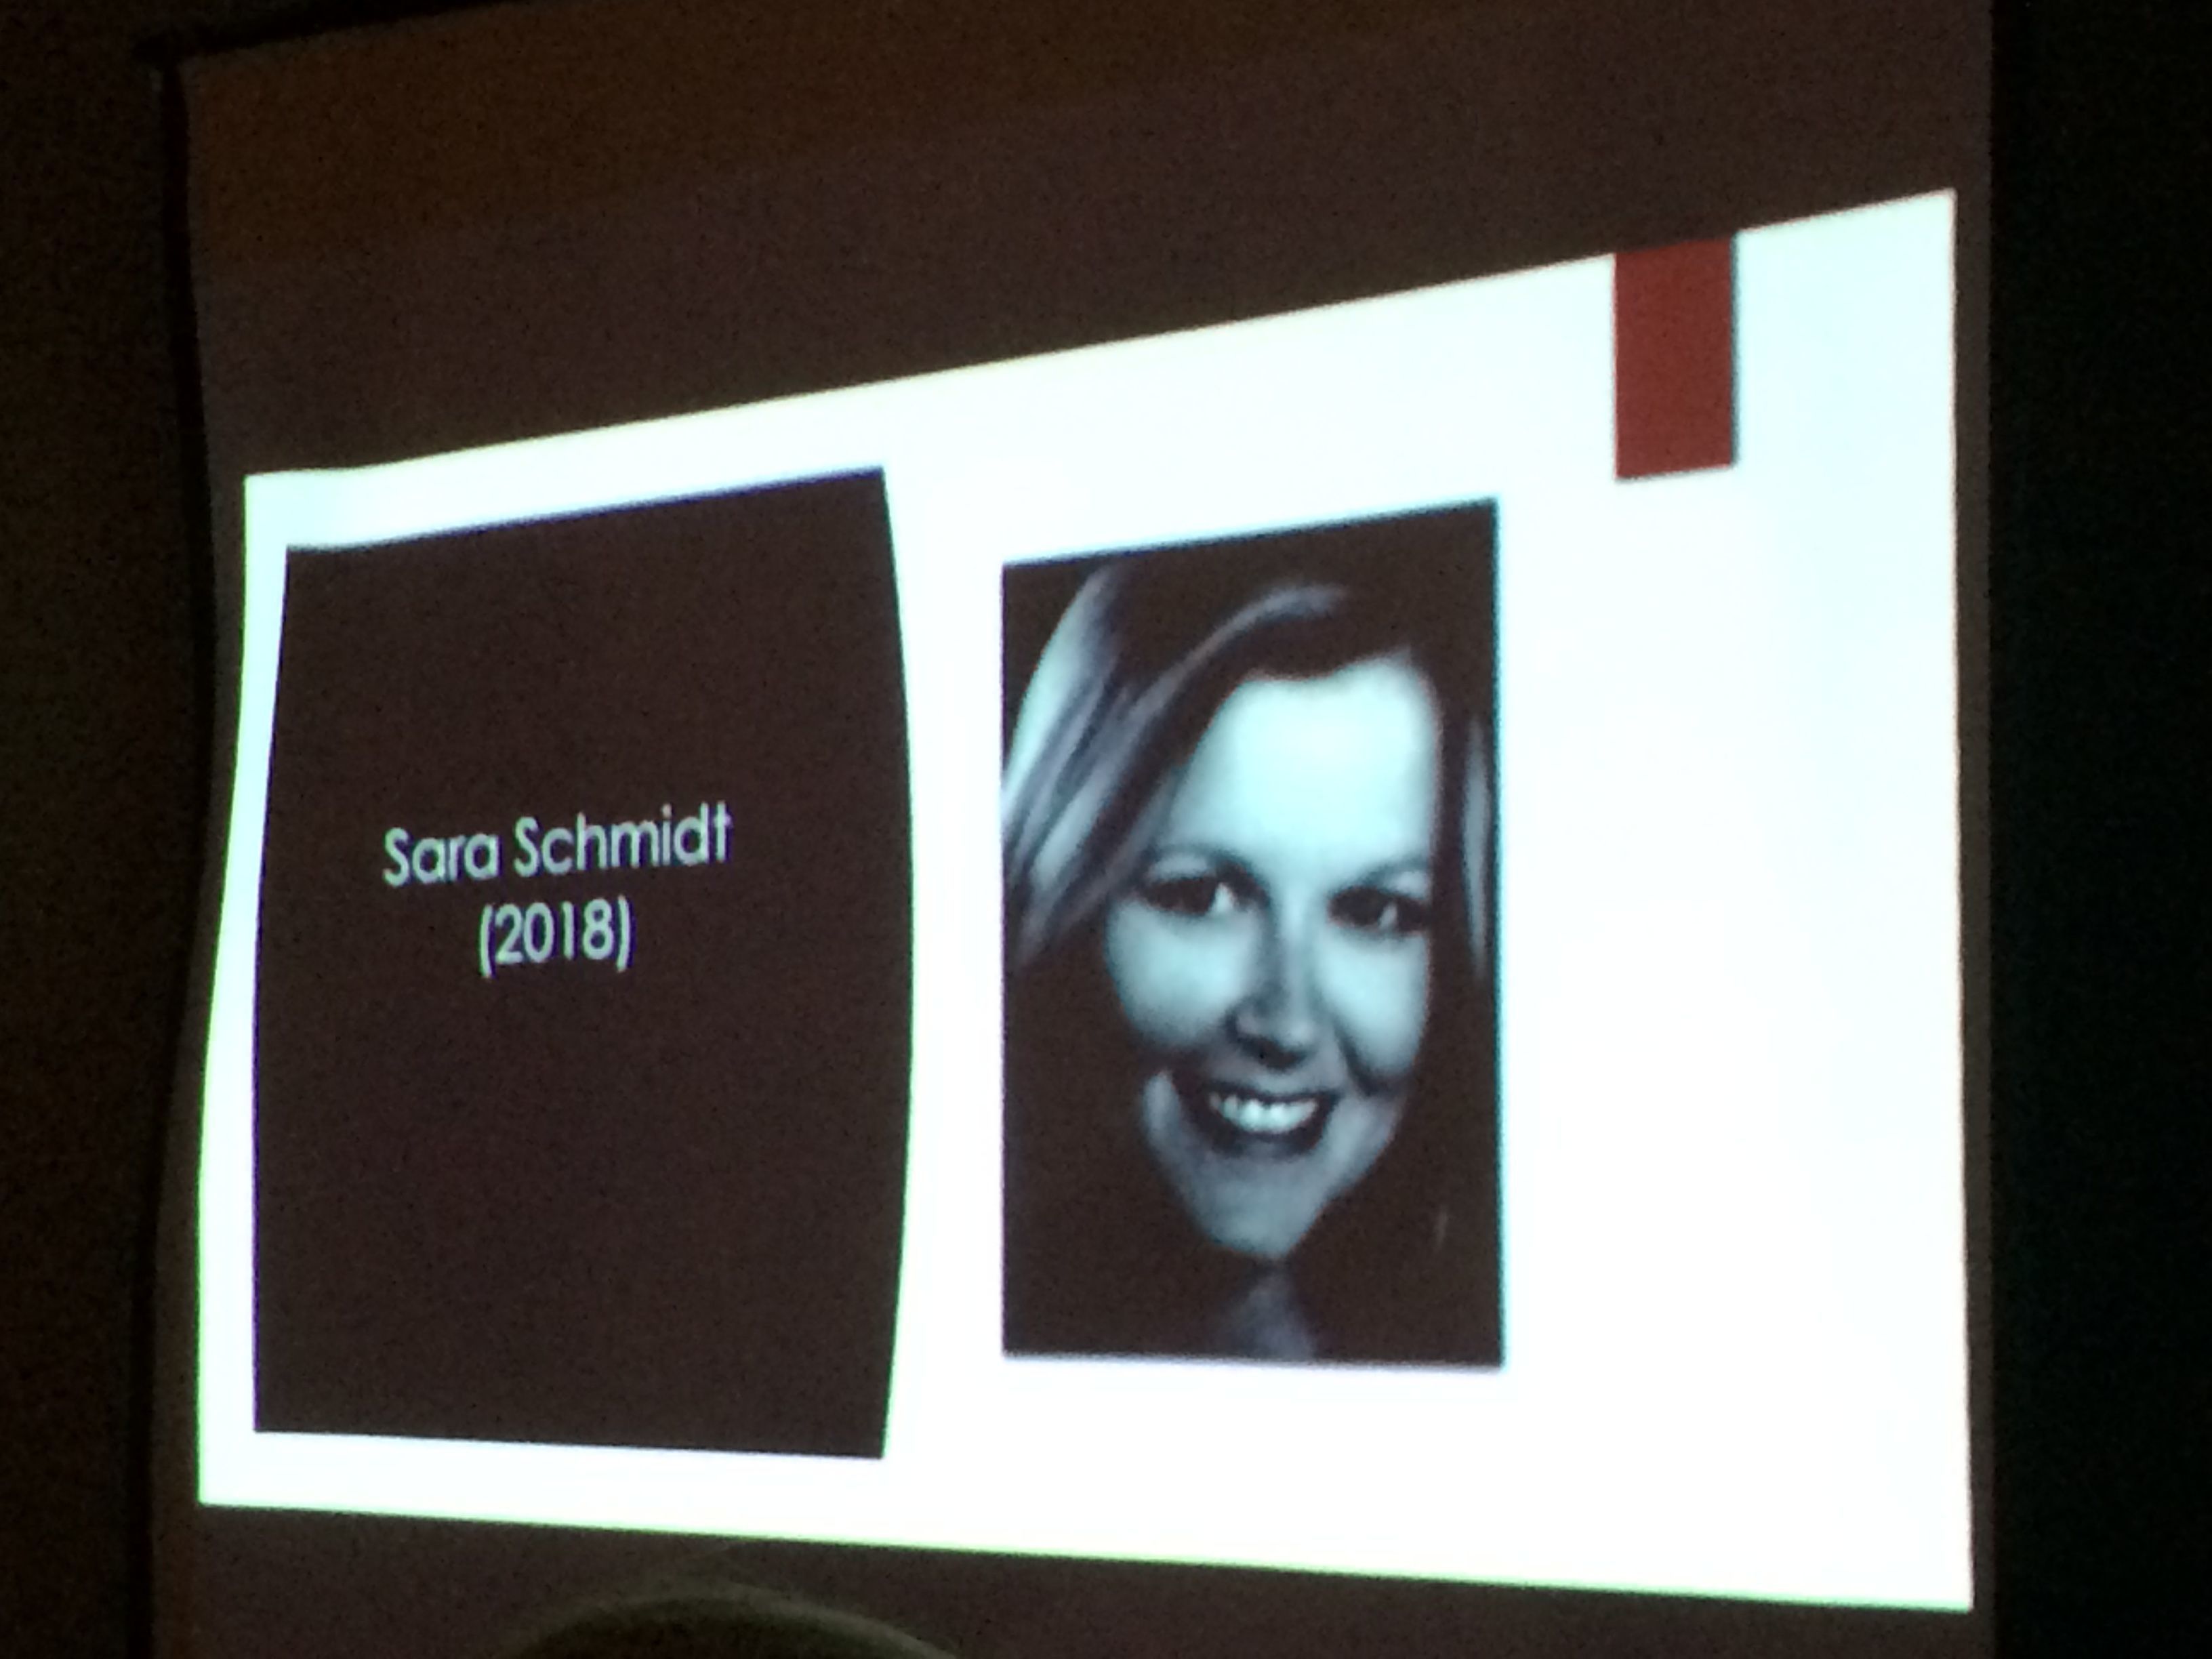 A slideshow shows an image of Sara Schmidt at a vigil. Schmidt was shot killed by her husband in 2018.